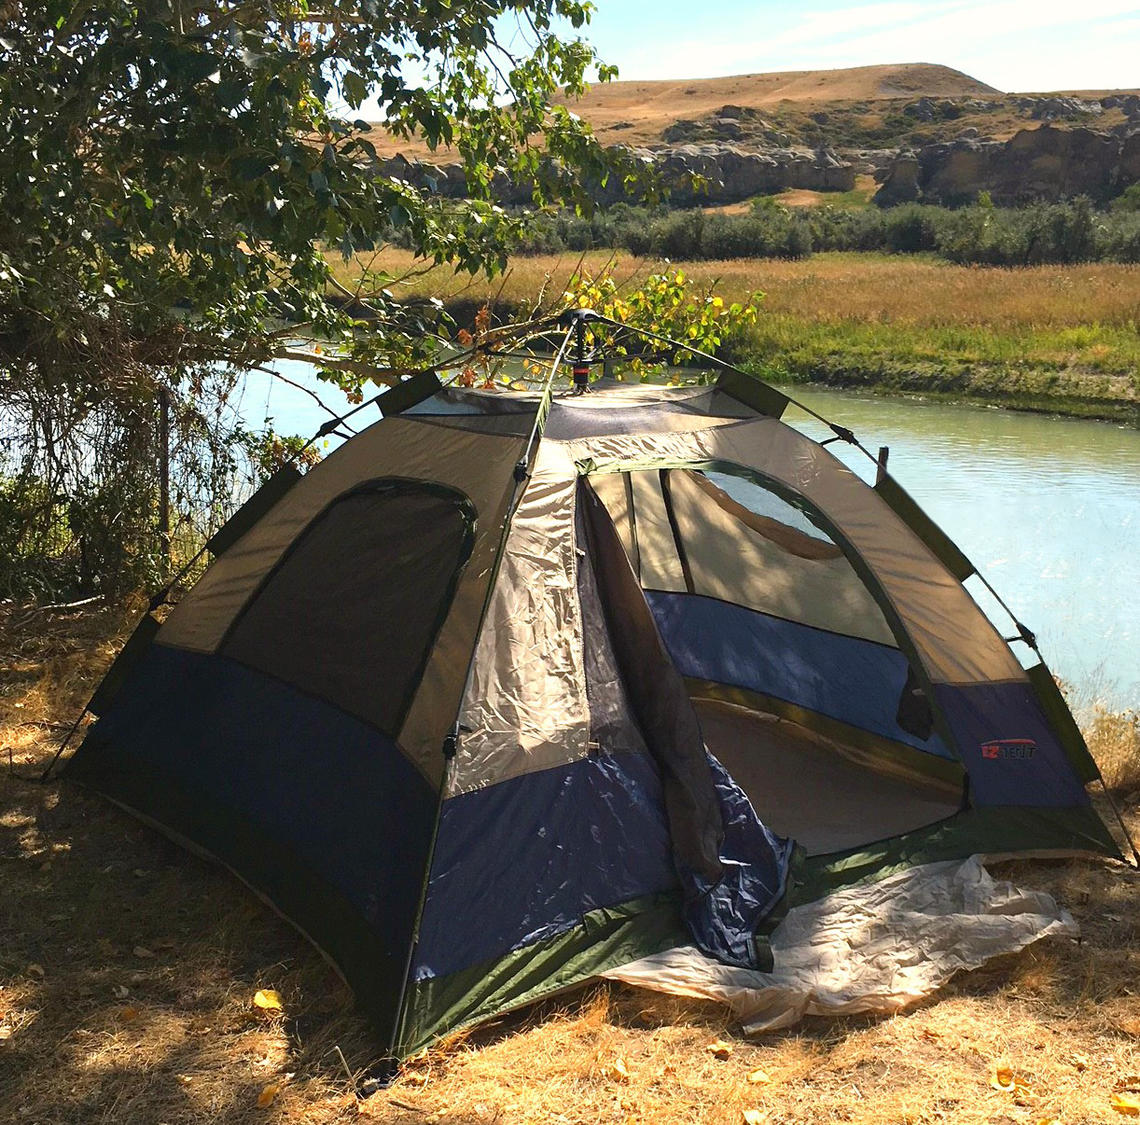 Students and faculty set up camp on the banks of the Milk River.